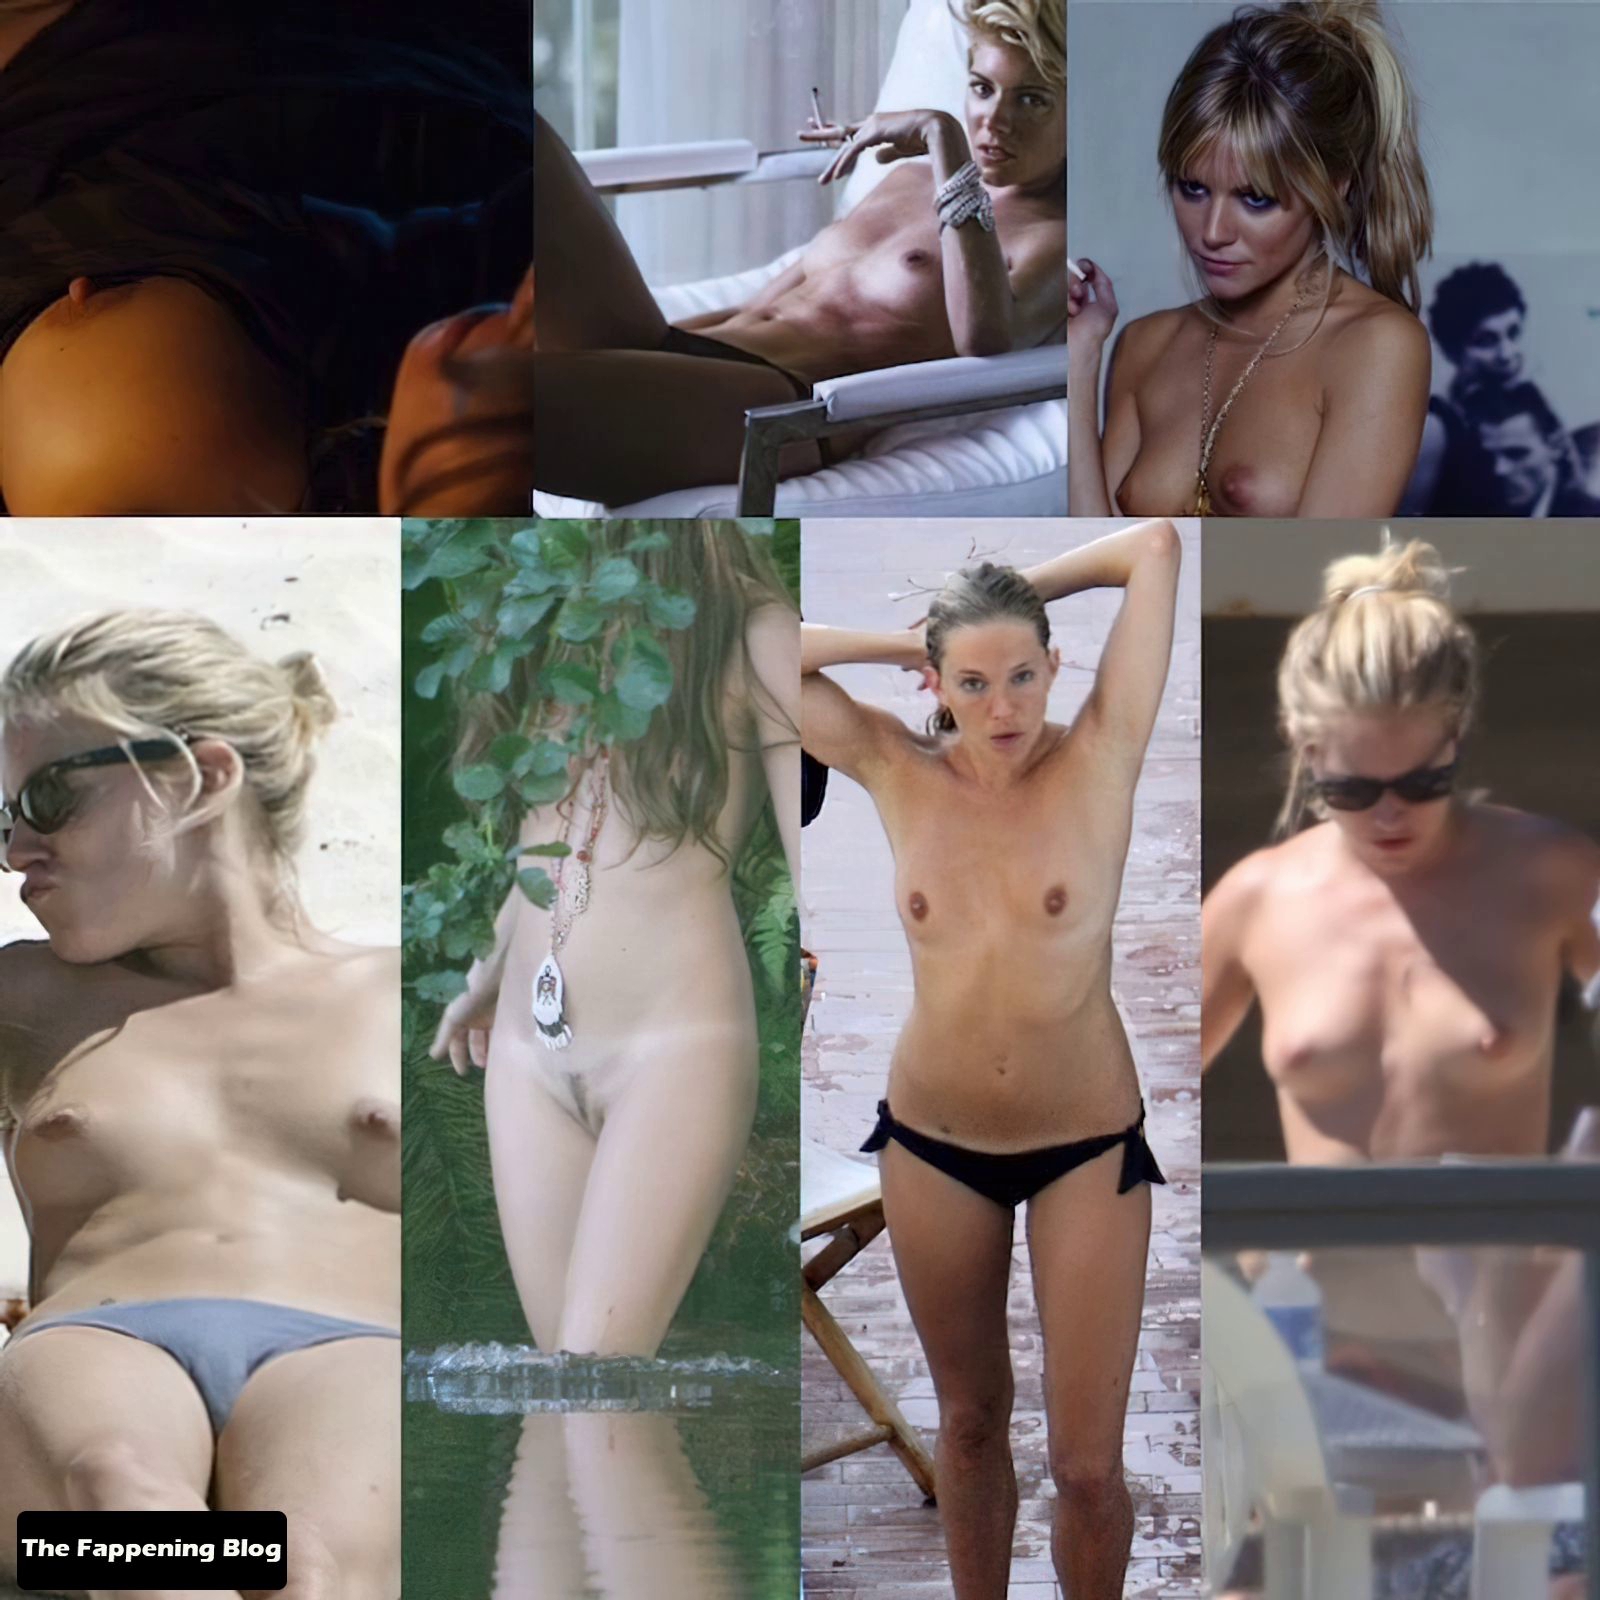 Sienna Miller Nude Images now hd